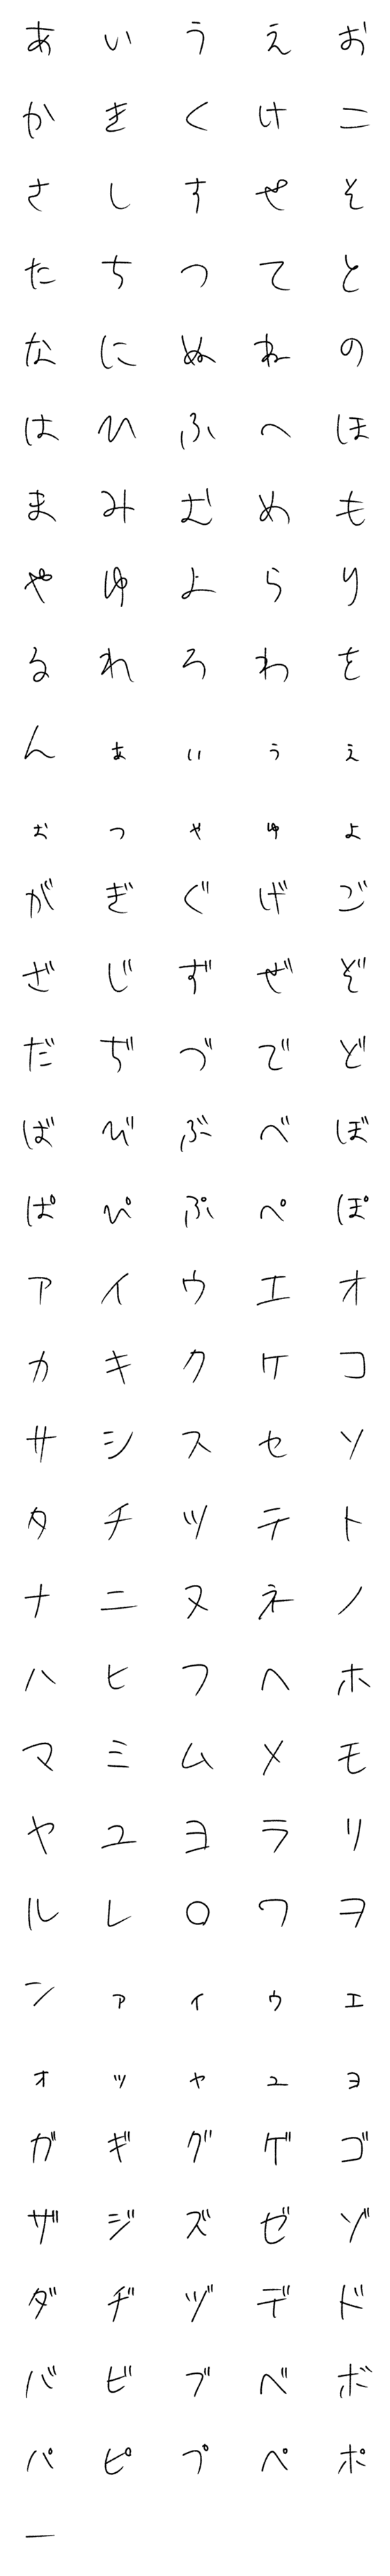 [LINE絵文字]雑文字の画像一覧